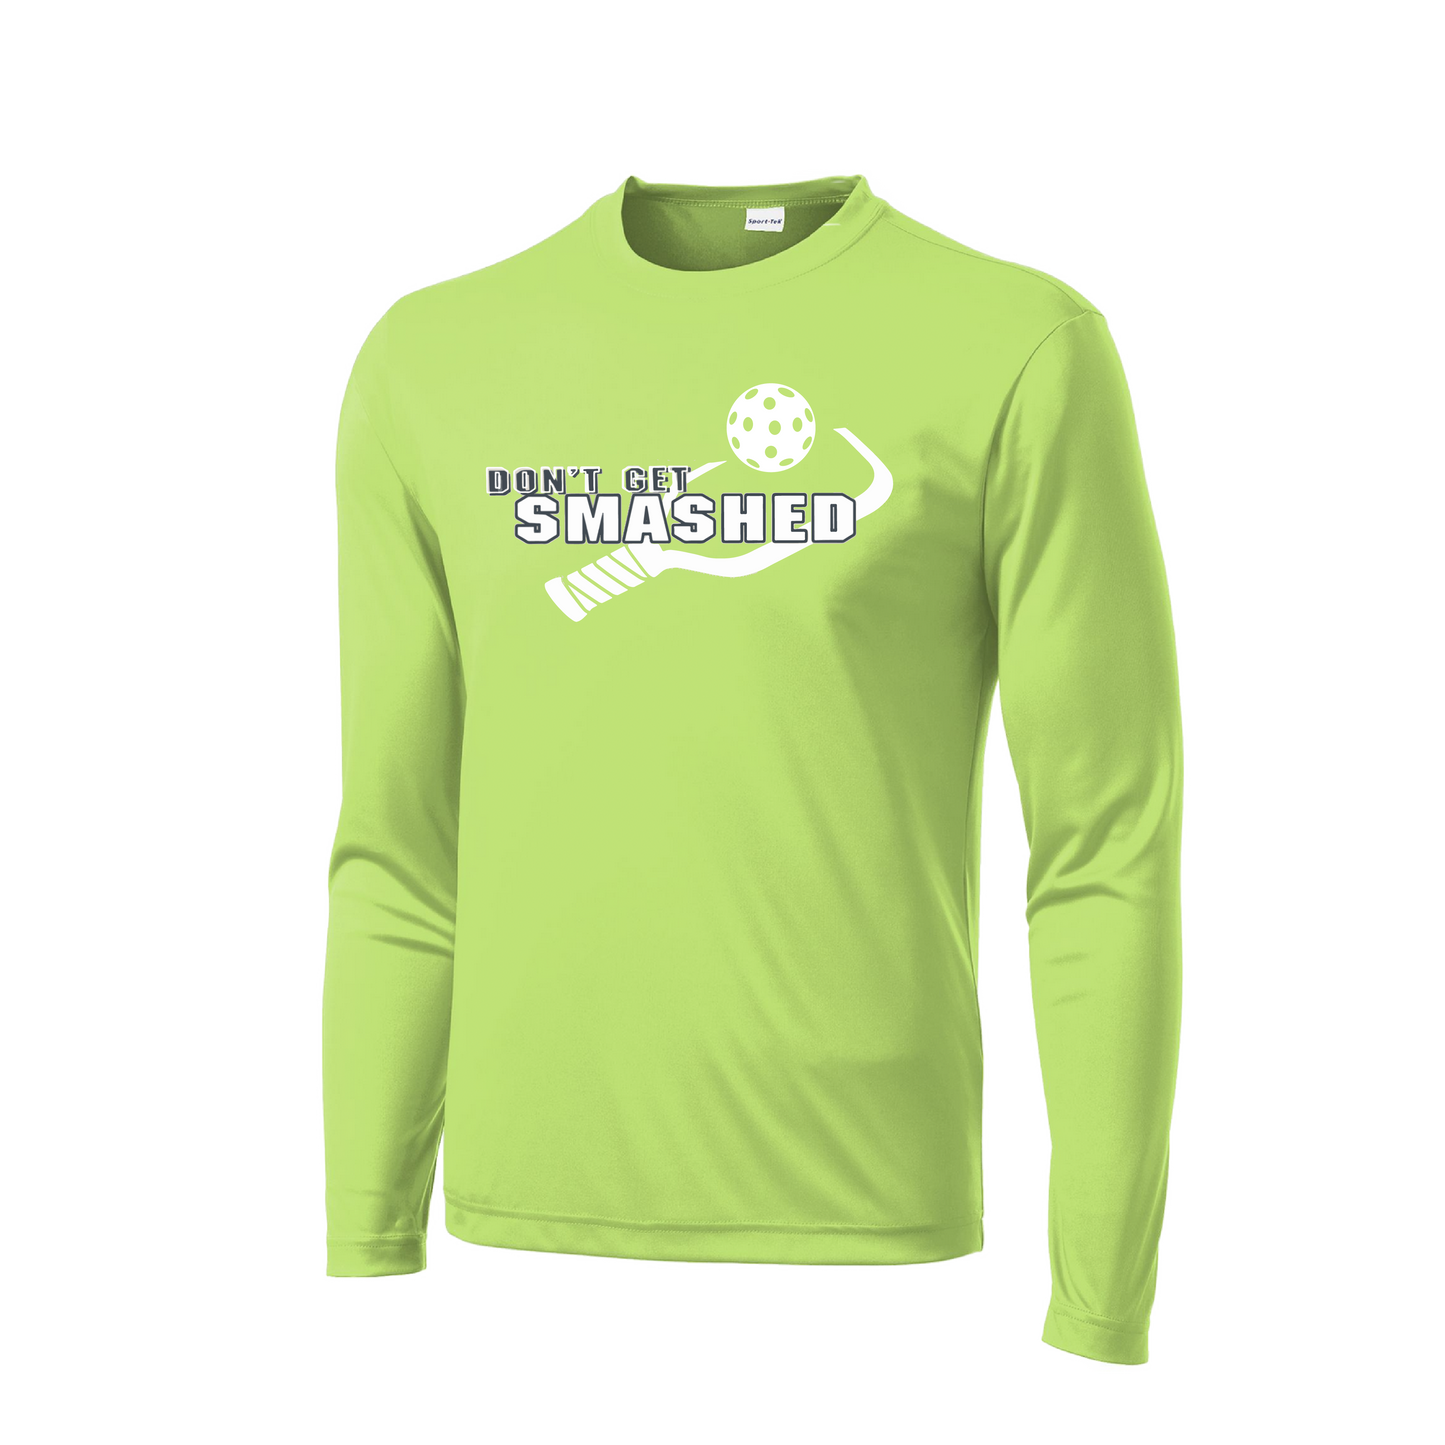 Stay comfortable and stylish with this breathable, lightweight Men's long sleeve shirt! PosiCharge technology ensures vivid colors and a well-maintained logo, setting you apart from the crowd. The removable tag and set-in sleeves are designed to keep you comfortable no matter where your day takes you.  Pickleball colors include purple, white or yellow. 